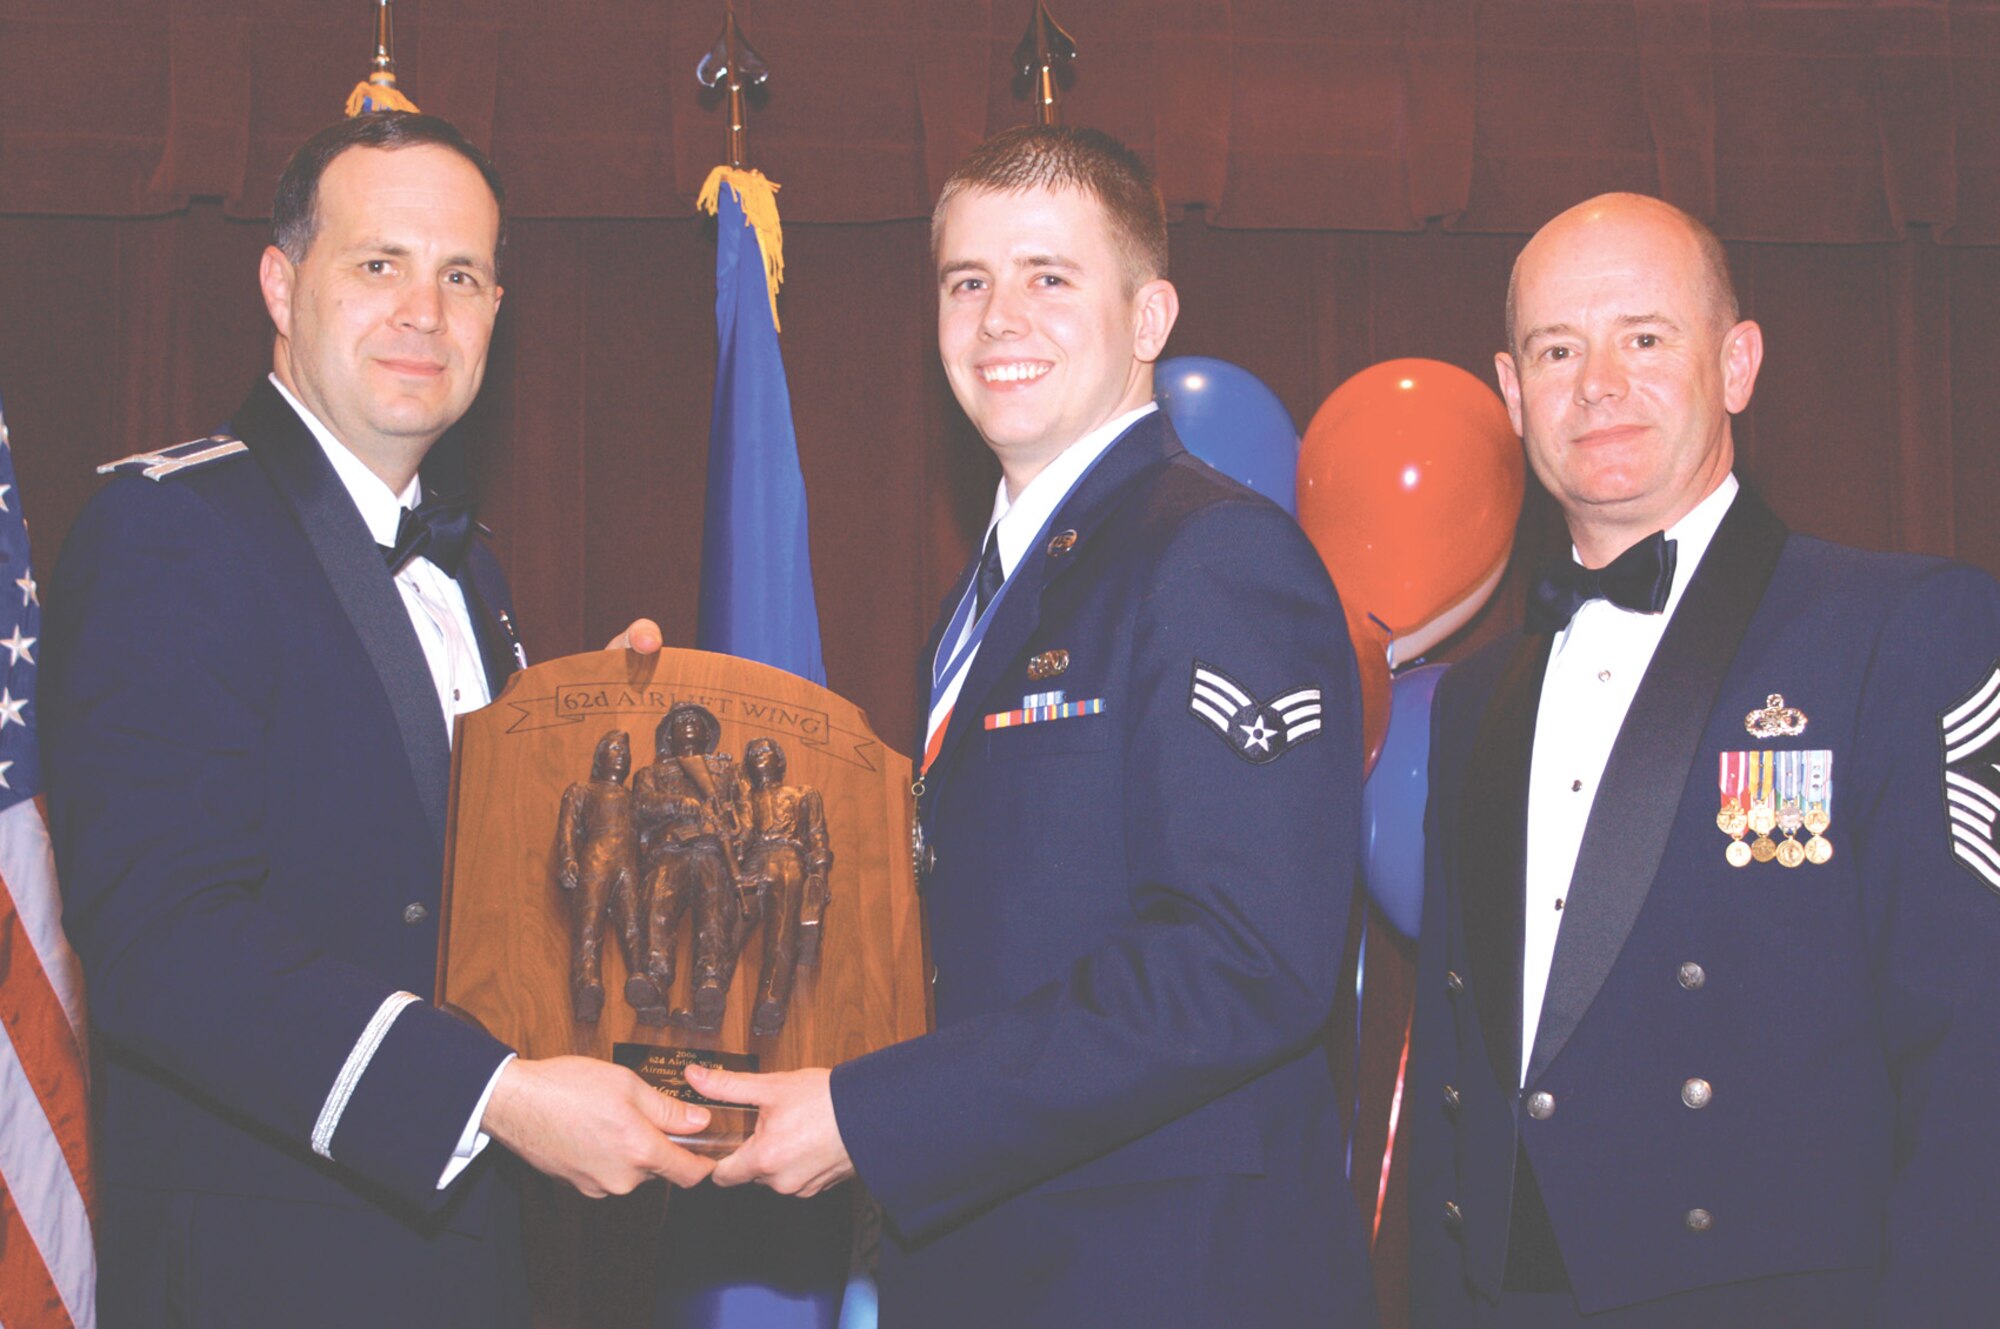 MCCHORD AIR FORCE BASE, Wash. -- Col. Jerry Martinez, 62nd Airlift Wing commander, left, and Chief Master Sgt. Russell Kuck, 62nd AW command chief master sergeant, right, present Airman of the Year Senior Airman Marc Spangler, 62nd Communications Squadron, with his award Feb. 1 at the 62nd AW Annual Awards Banquet at McChord?s Clubs and Community Center.
(U.S. Air Force Photo/Master Sgt. Richard Hinckley)